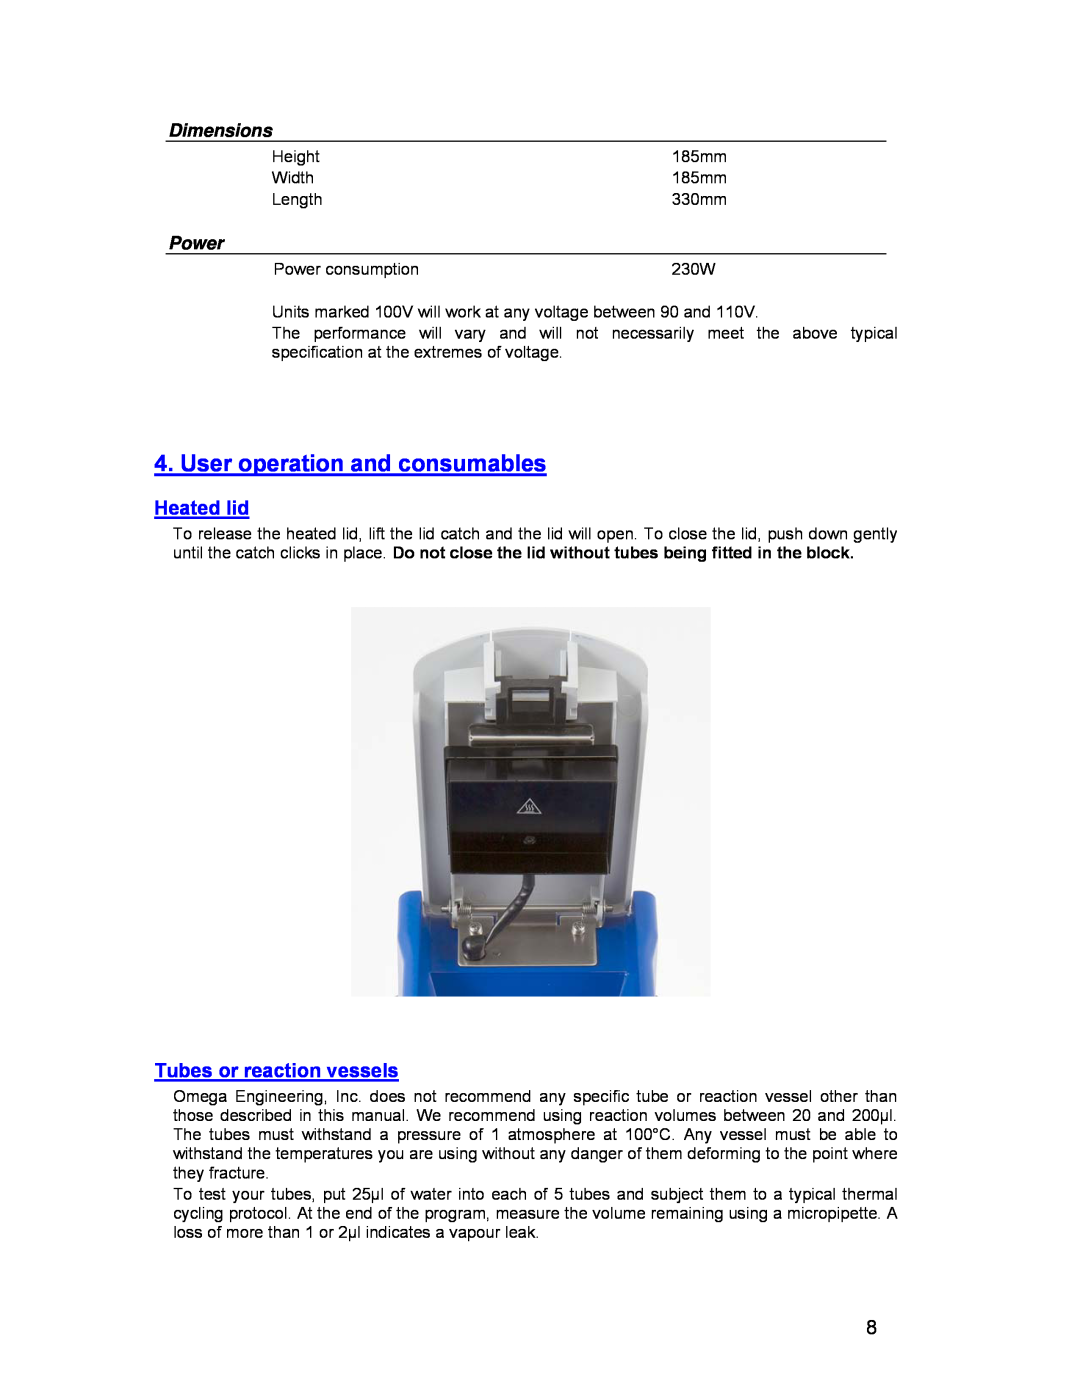 Omega Engineering 48, 20, 30, 25 User operation and consumables, Heated lid, Tubes or reaction vessels, Dimensions, Power 